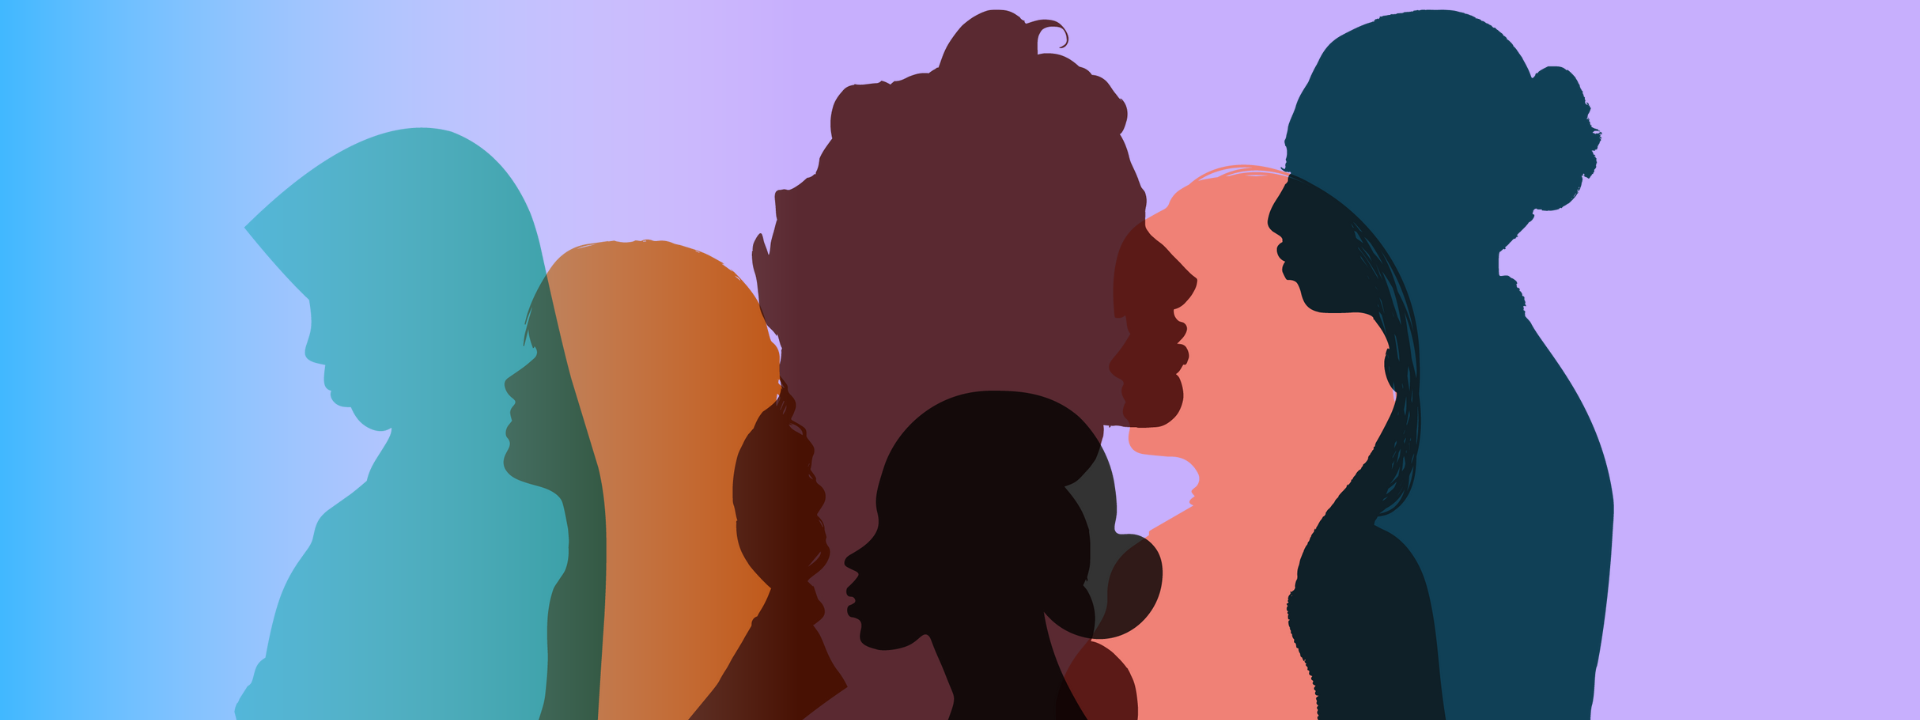 Image of Women's silhouettes 